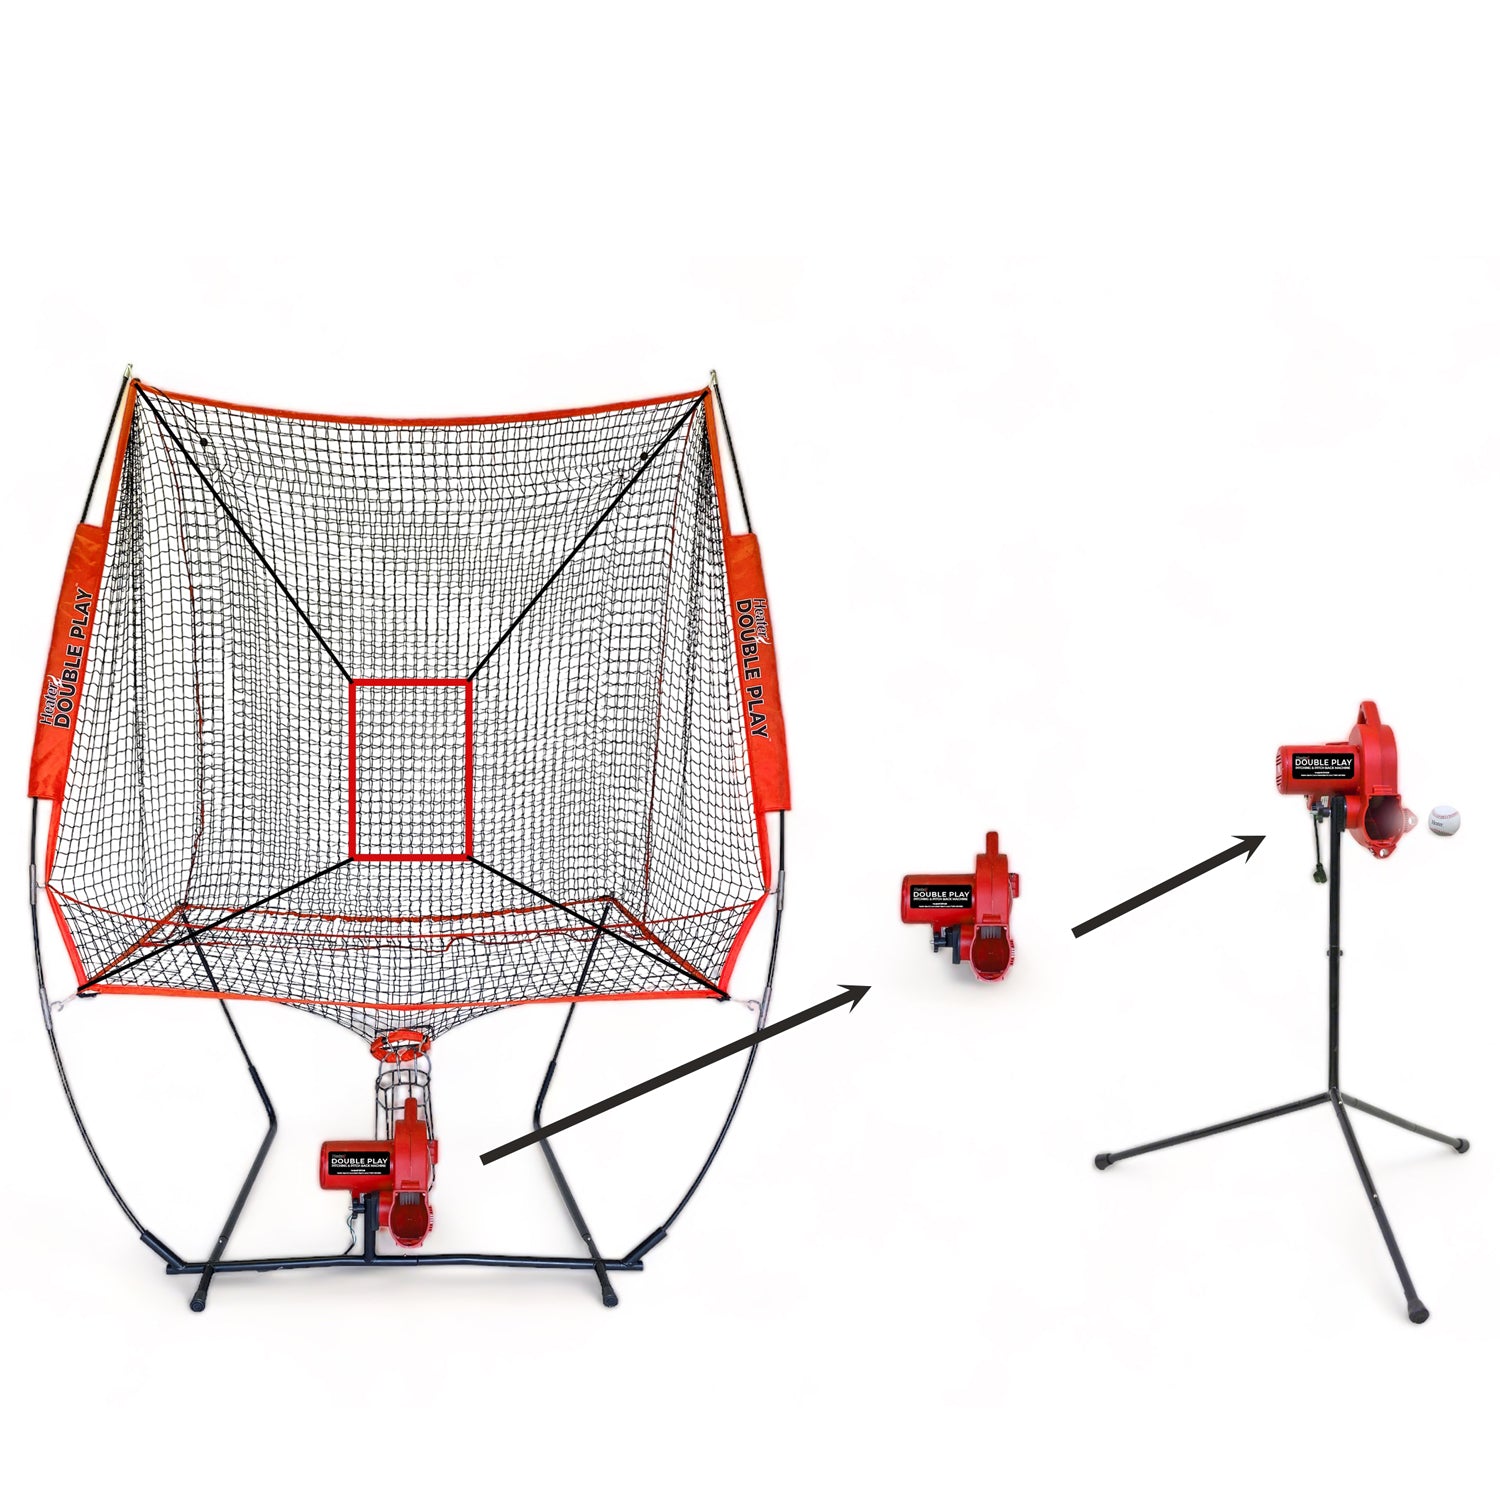 Double Play Pitch Back &amp; Pitching Machine - Baseball Training Tool - 2-in-1 - Fielding &amp; Hitting - Heater Sports - Pitch Machine Pros